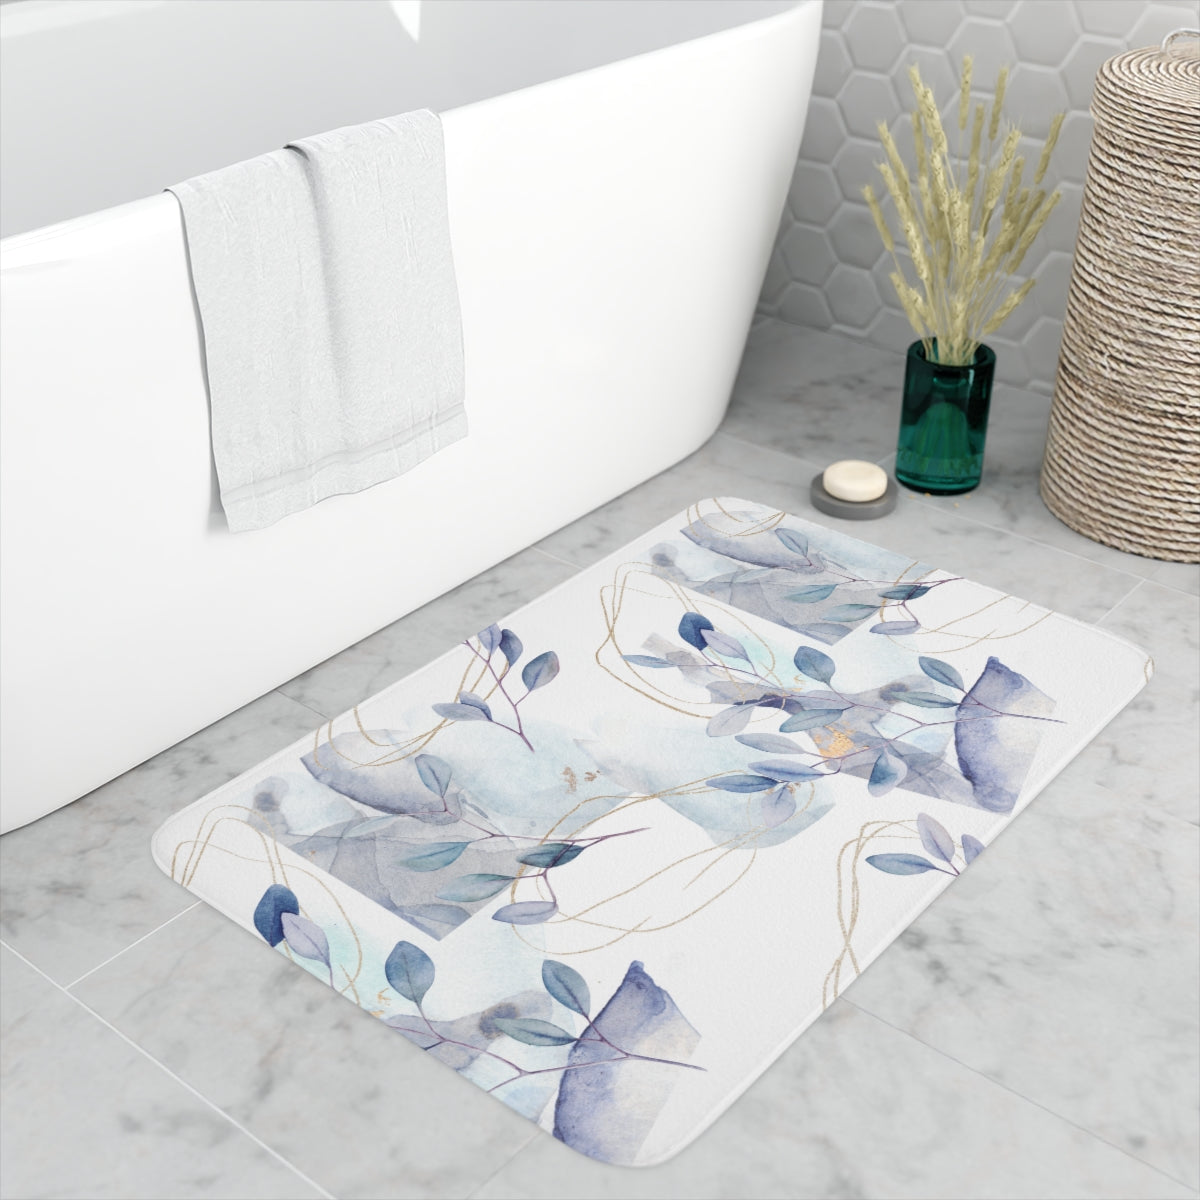 Abstract Floral Branches Memory Foam Bath Mat